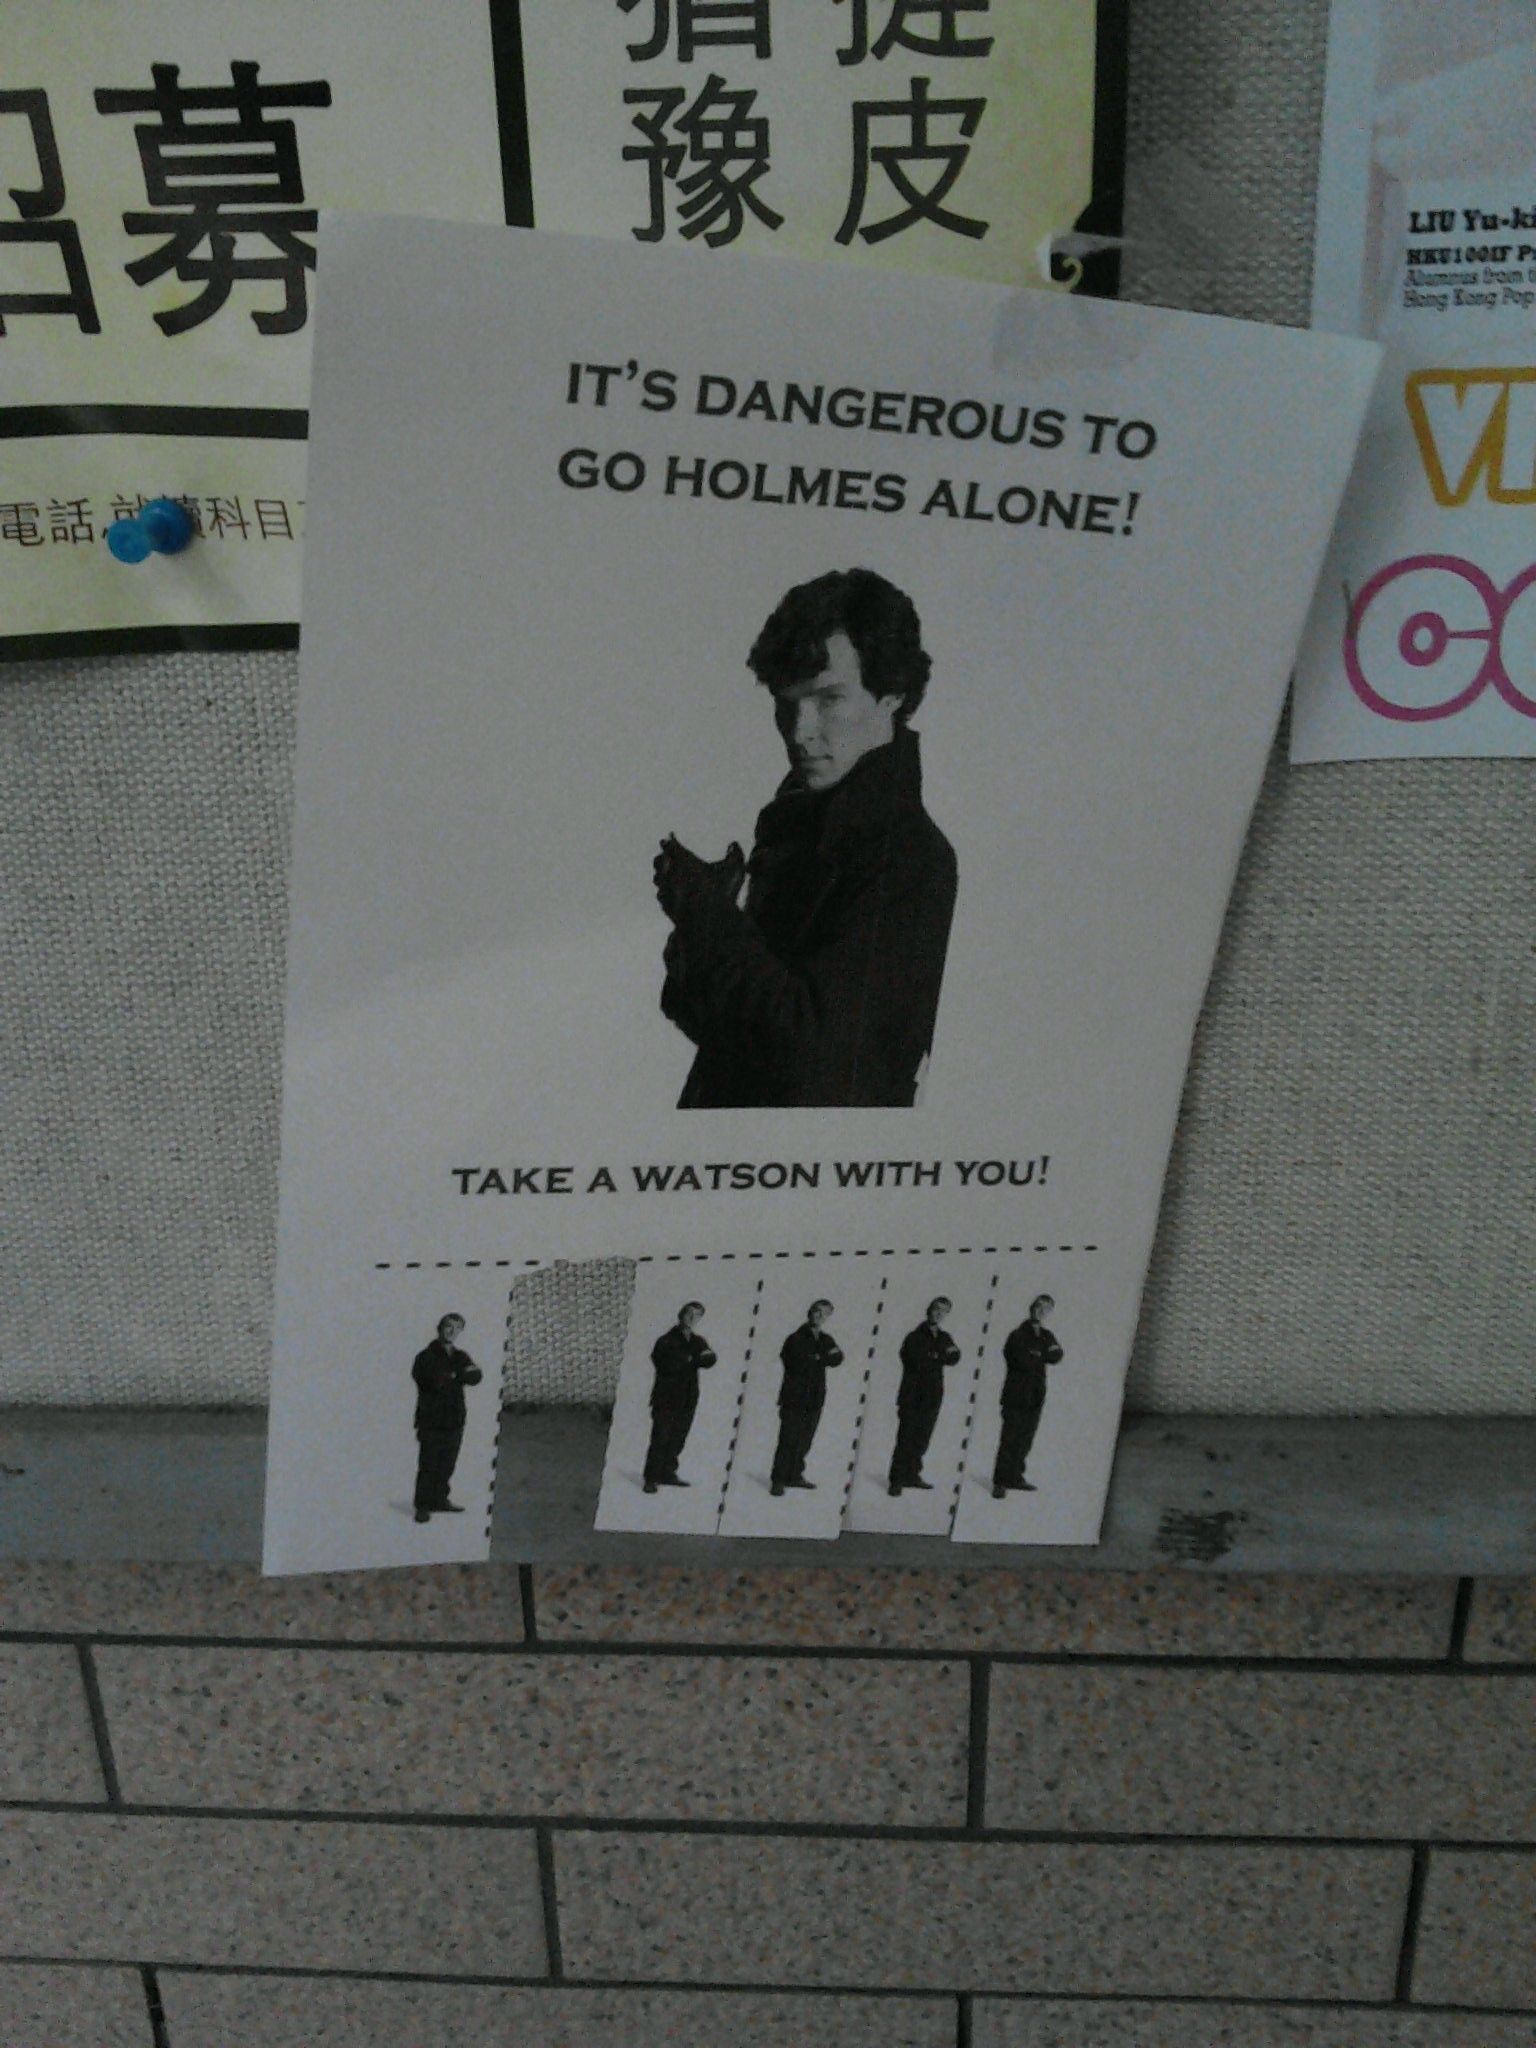 FUNNY Poster: “Its Dangerous to go Holmes alone, take a Watson with You.” with p